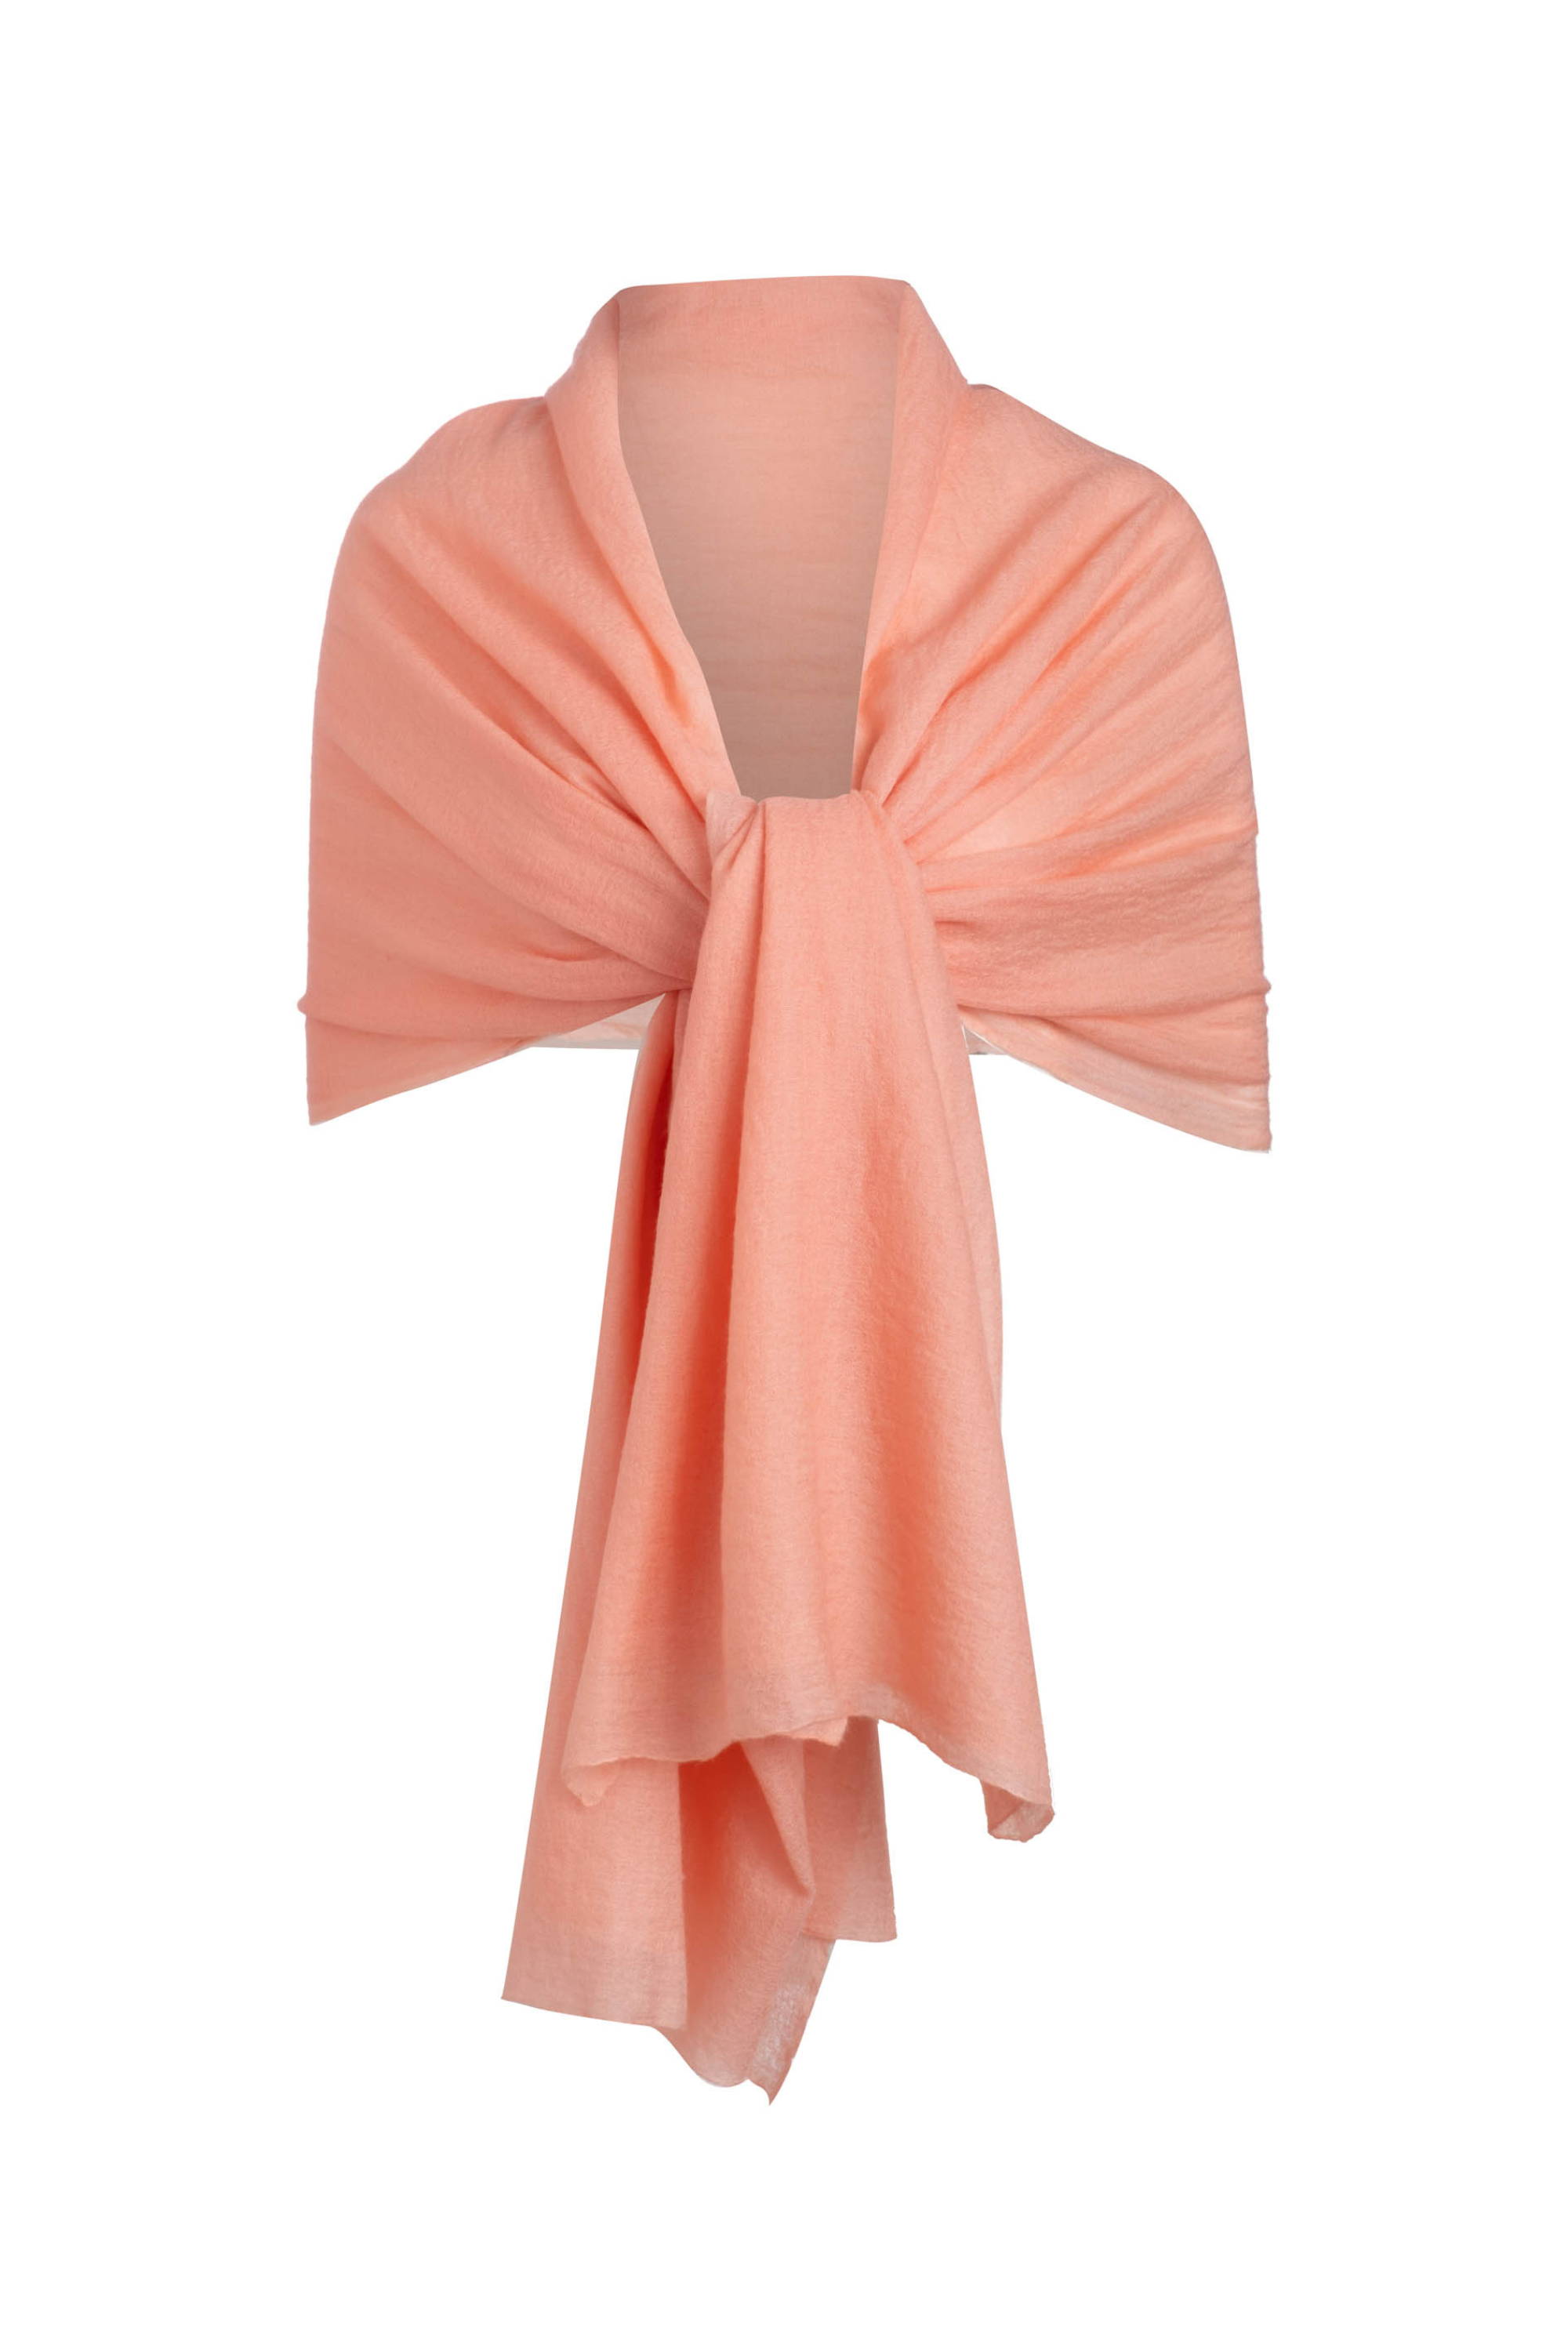 orange apricot cashmere wrap for bridesmaids gifts